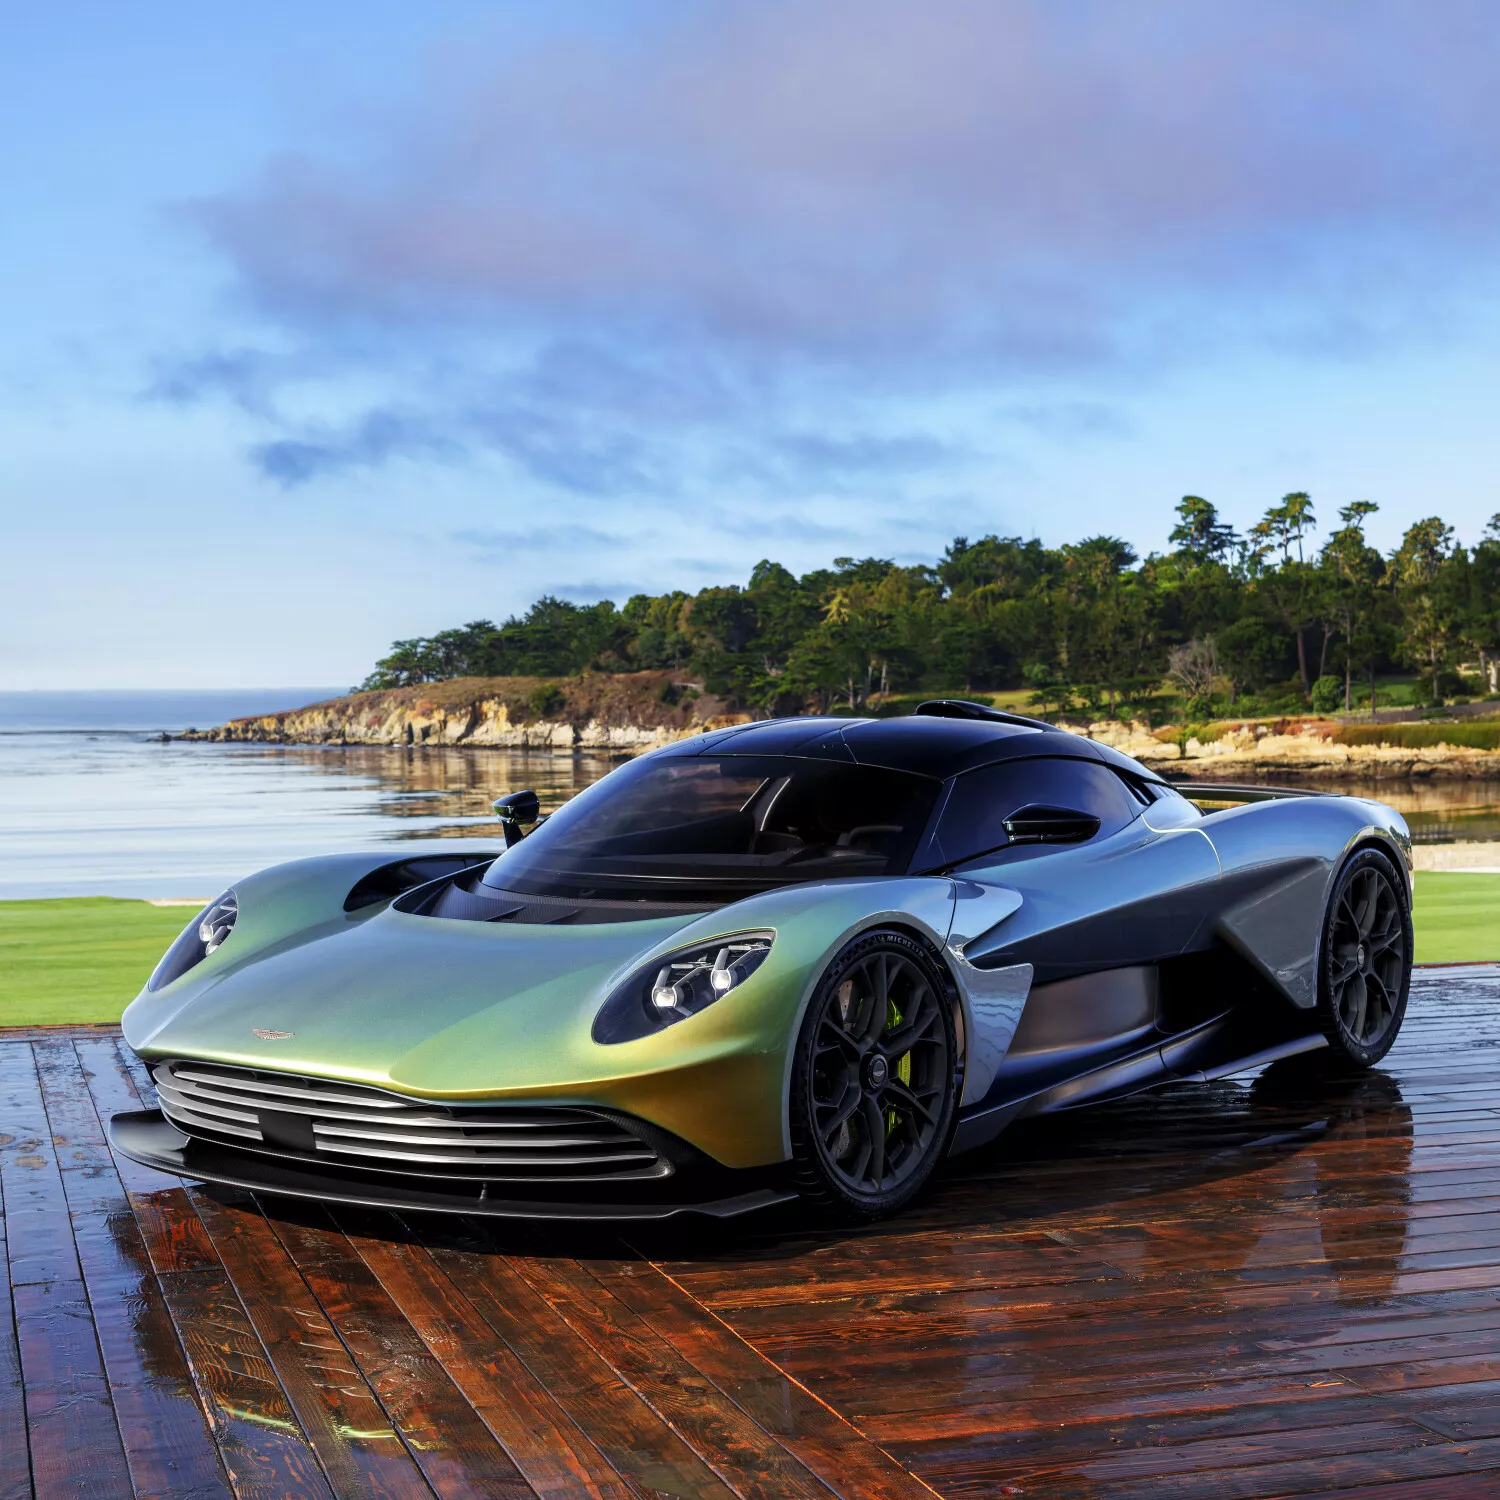 Aston Martin Reveals Driving Simulator That Costs a Very Real $74,000